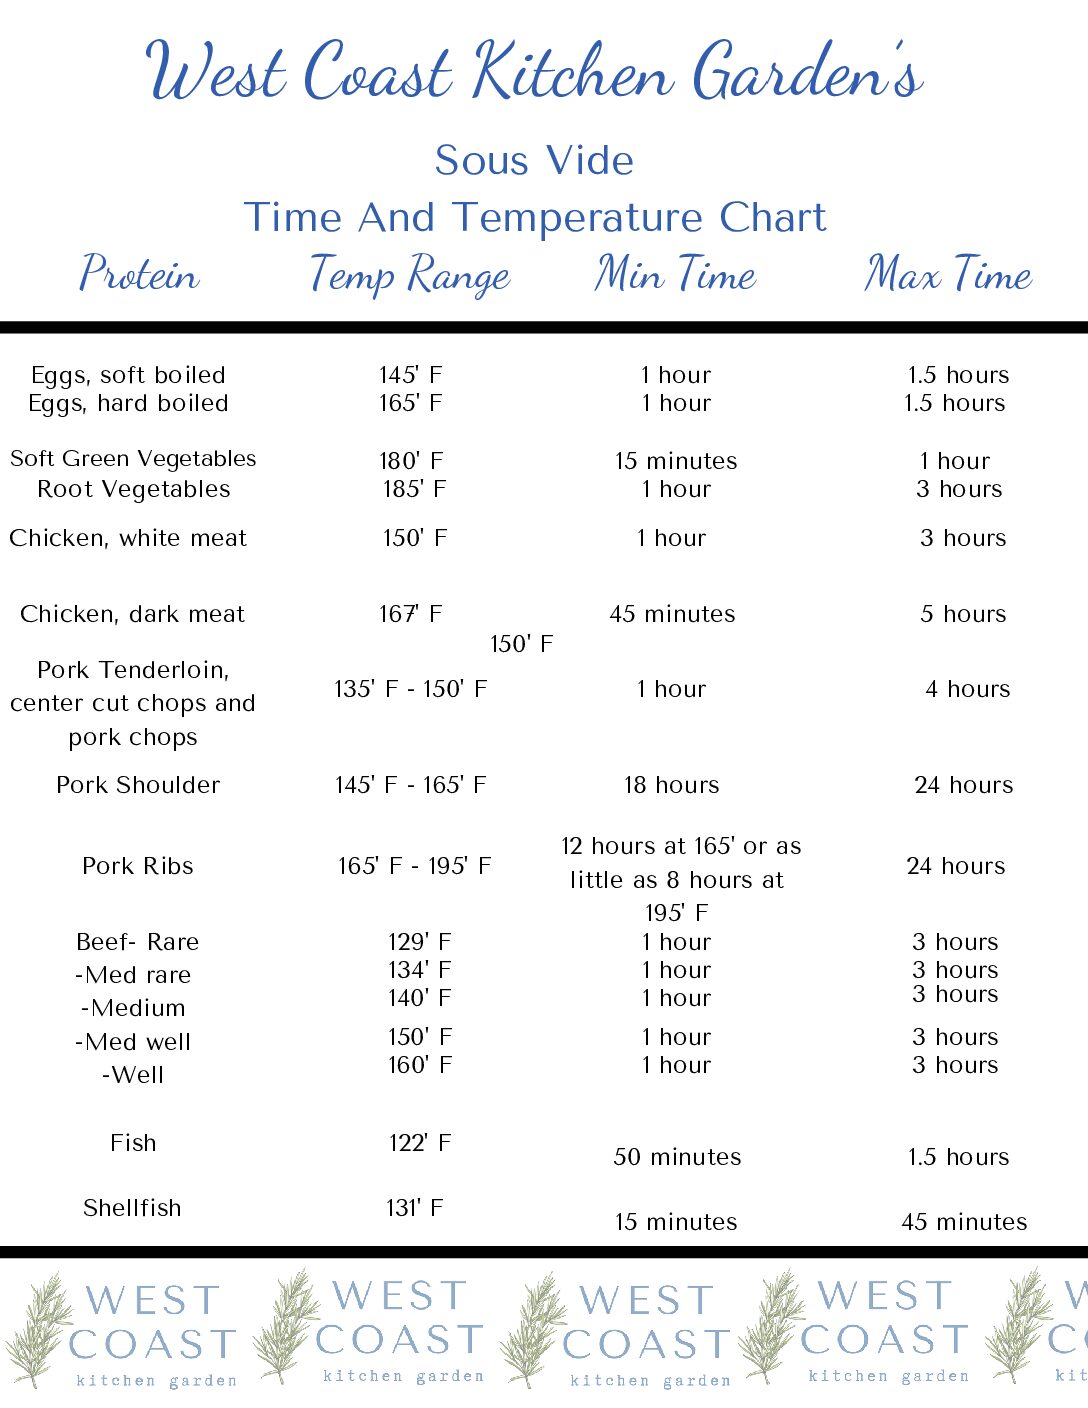 Printable sous vide time and temperature chart for pork, beef, lamb, fish, shellfish, eggs and vegetables.